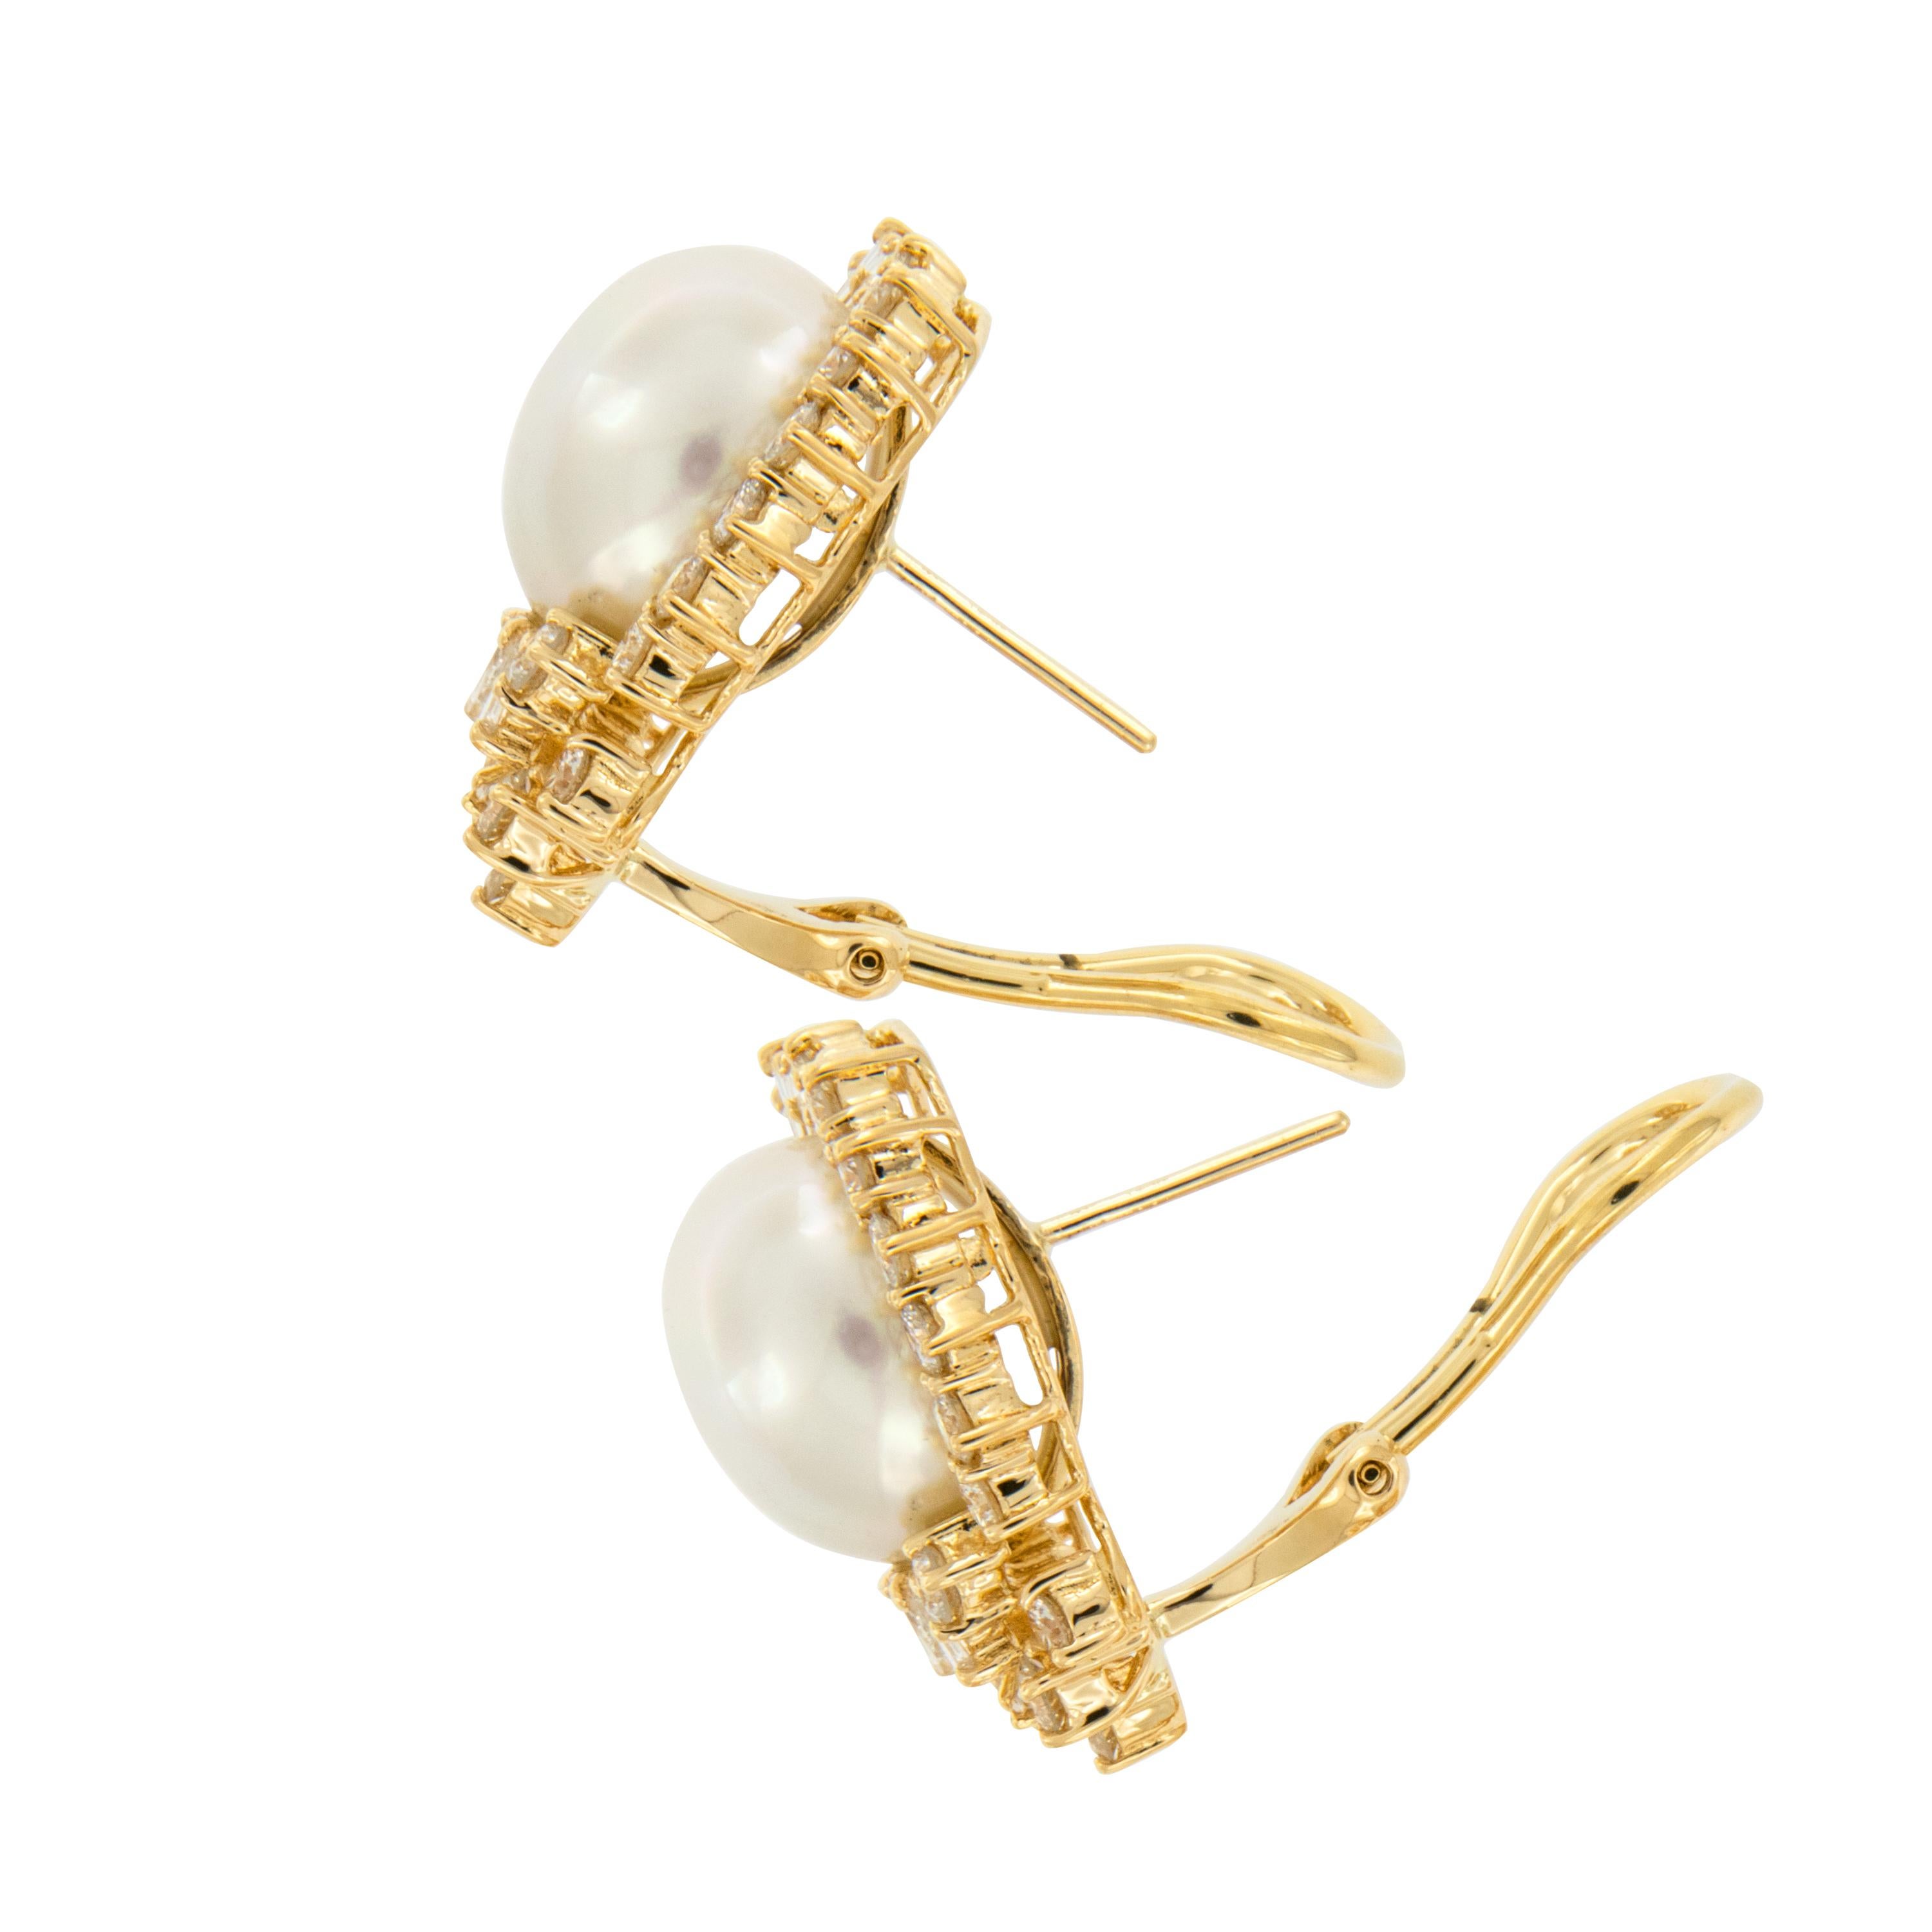 Baguette Cut 18 Karat Yellow Gold South Sea Pearl and Diamond Cocktail Earrings